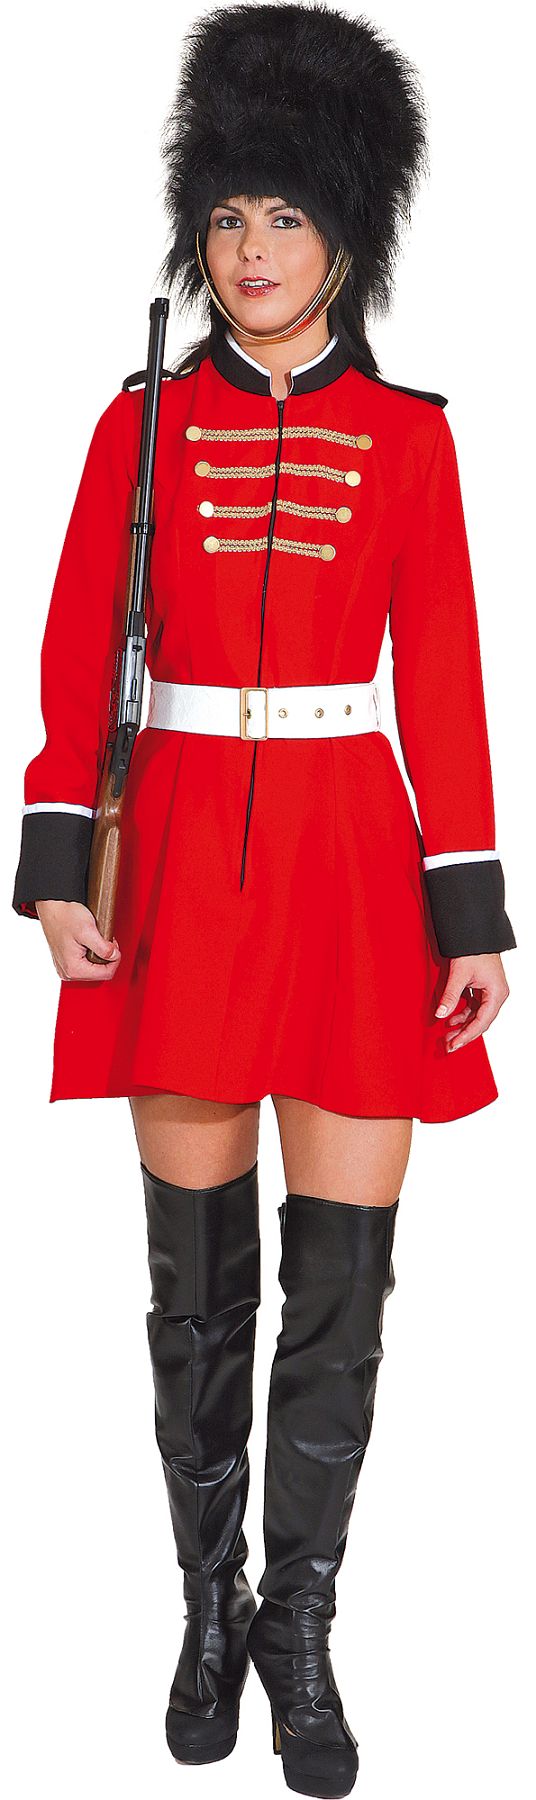 Costume Soldier Royal Guard Woman, red-black